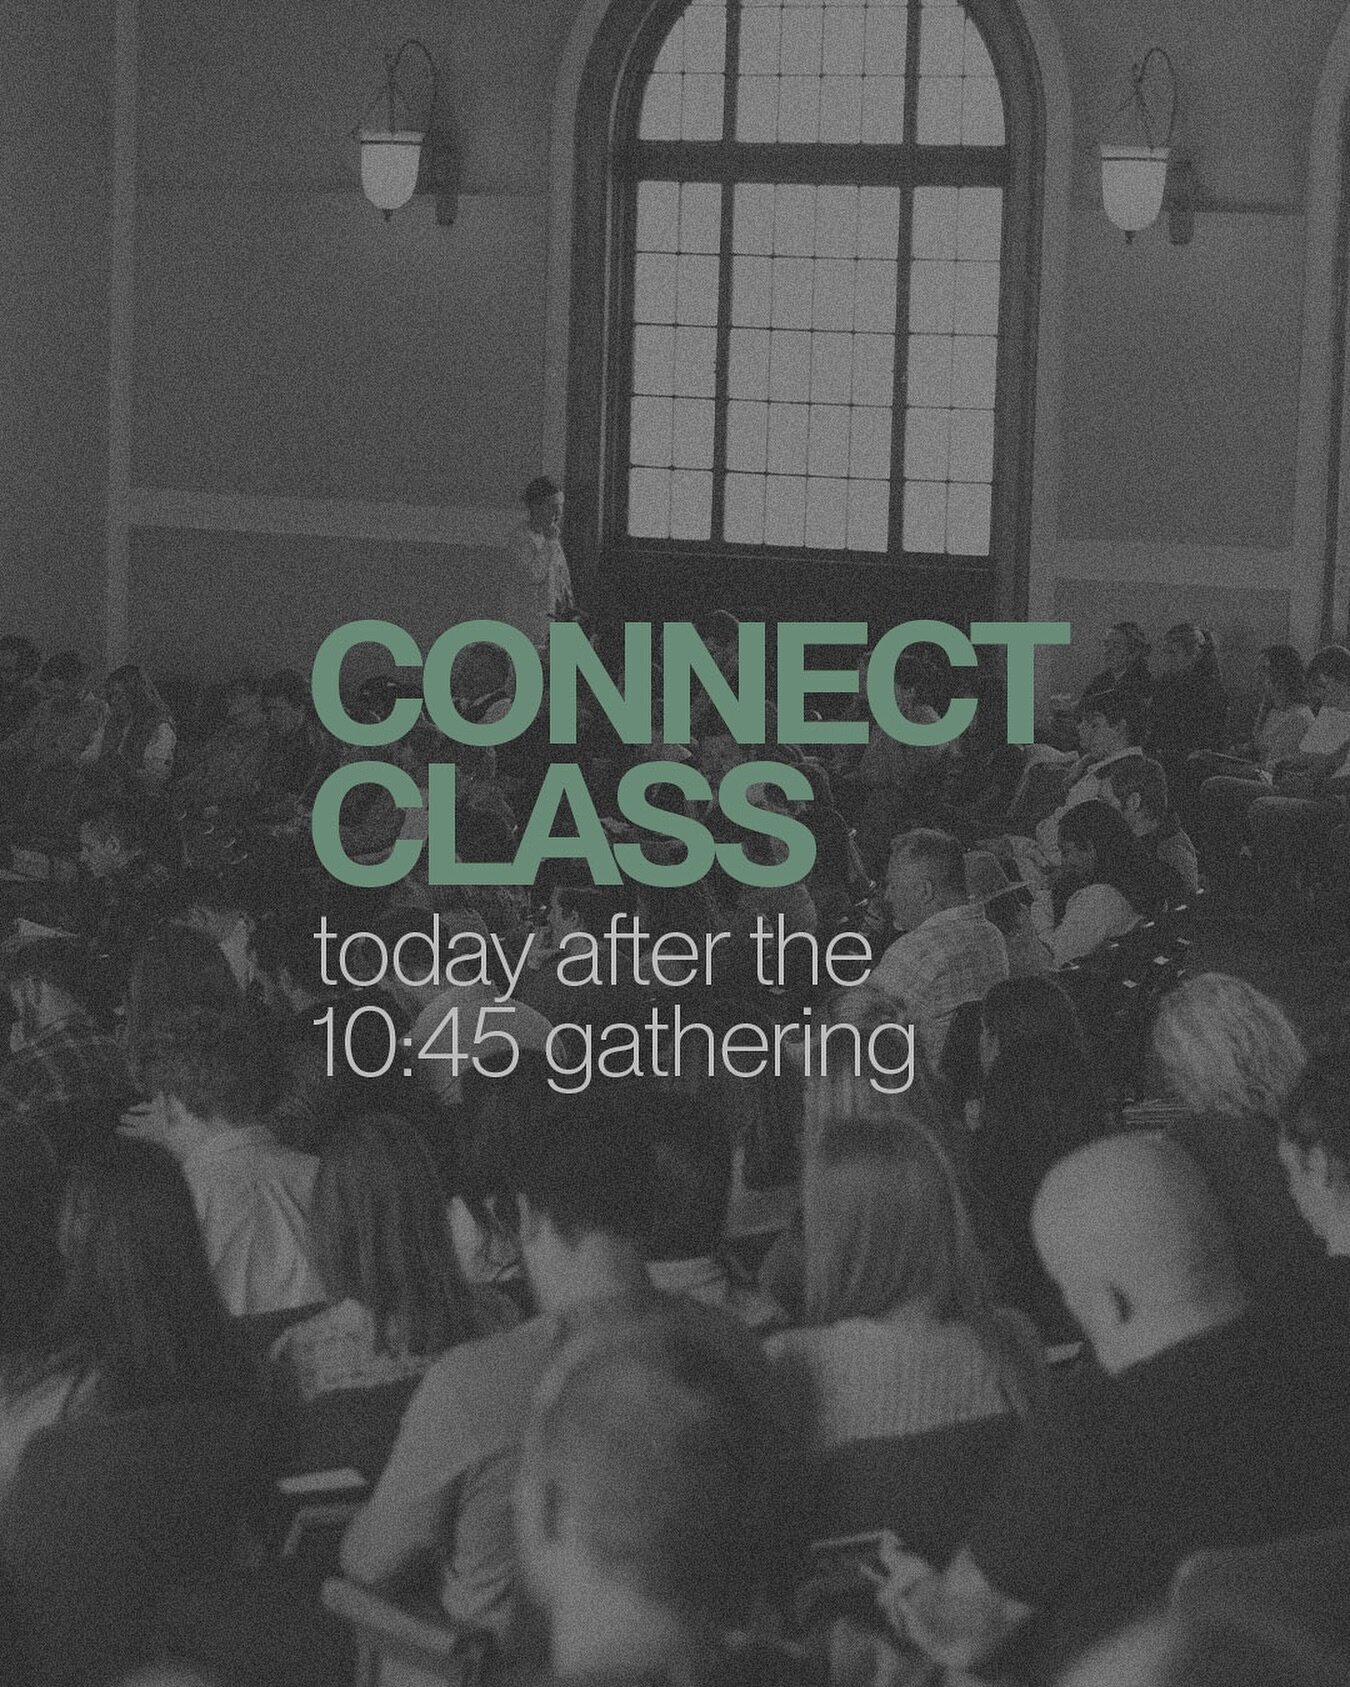 Are you new here? Wondering what we believe? Need to make a friend? Just want free lunch and childcare?

If you said yes to ANY of these, then you need to be at our connect class TODAY directly after our 10:45 service.

This class lasts about an hour